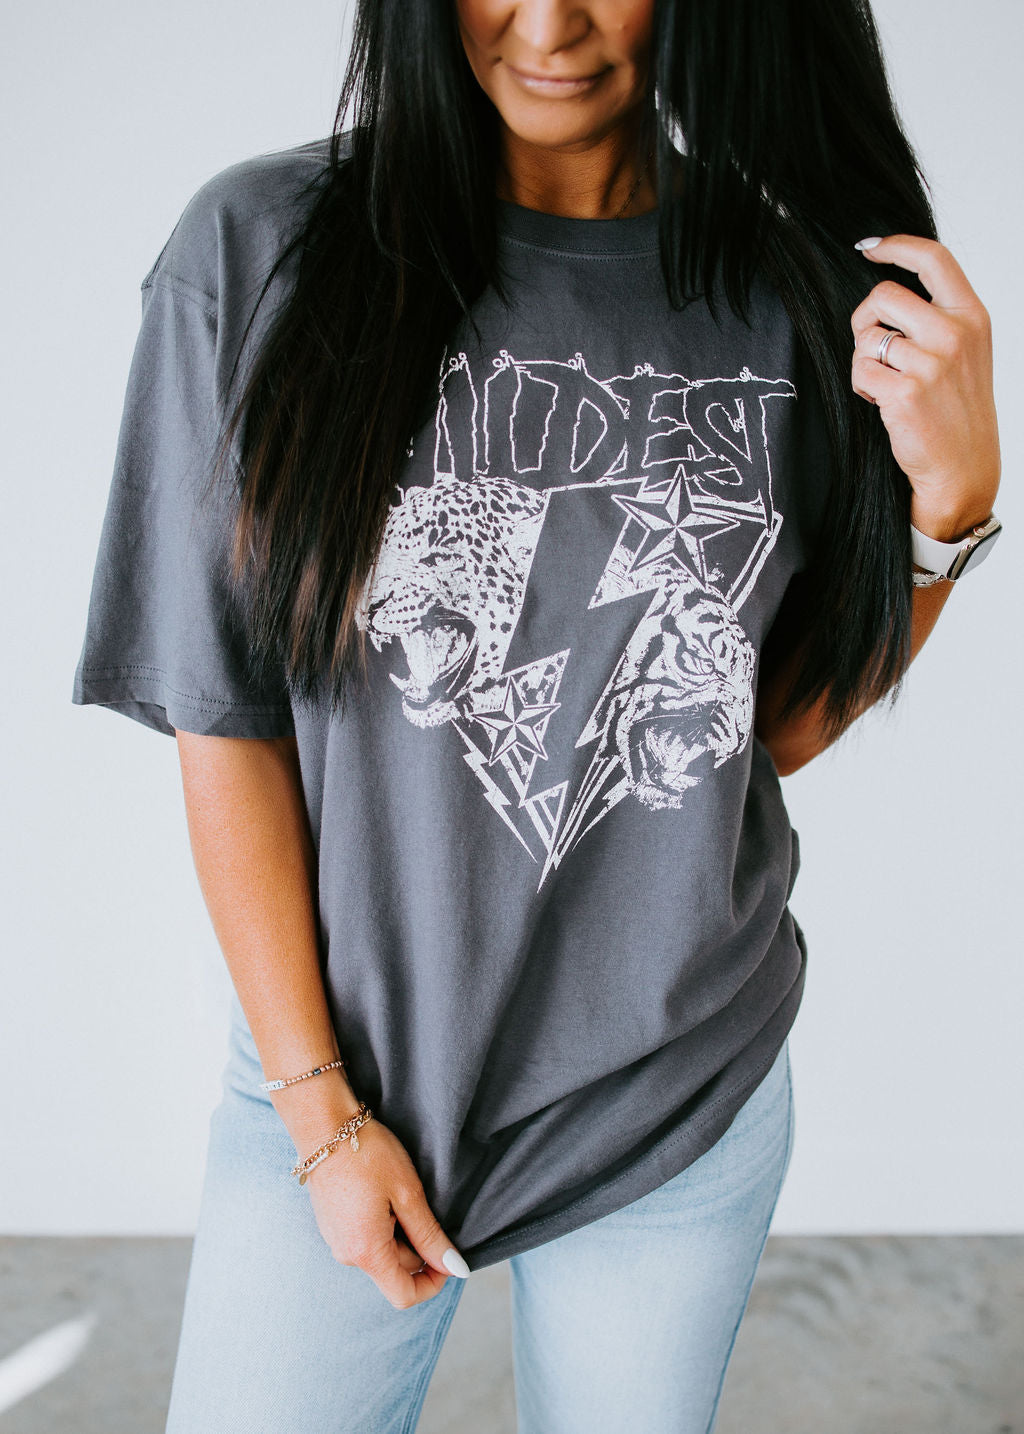 image of Wildest Graphic Tee